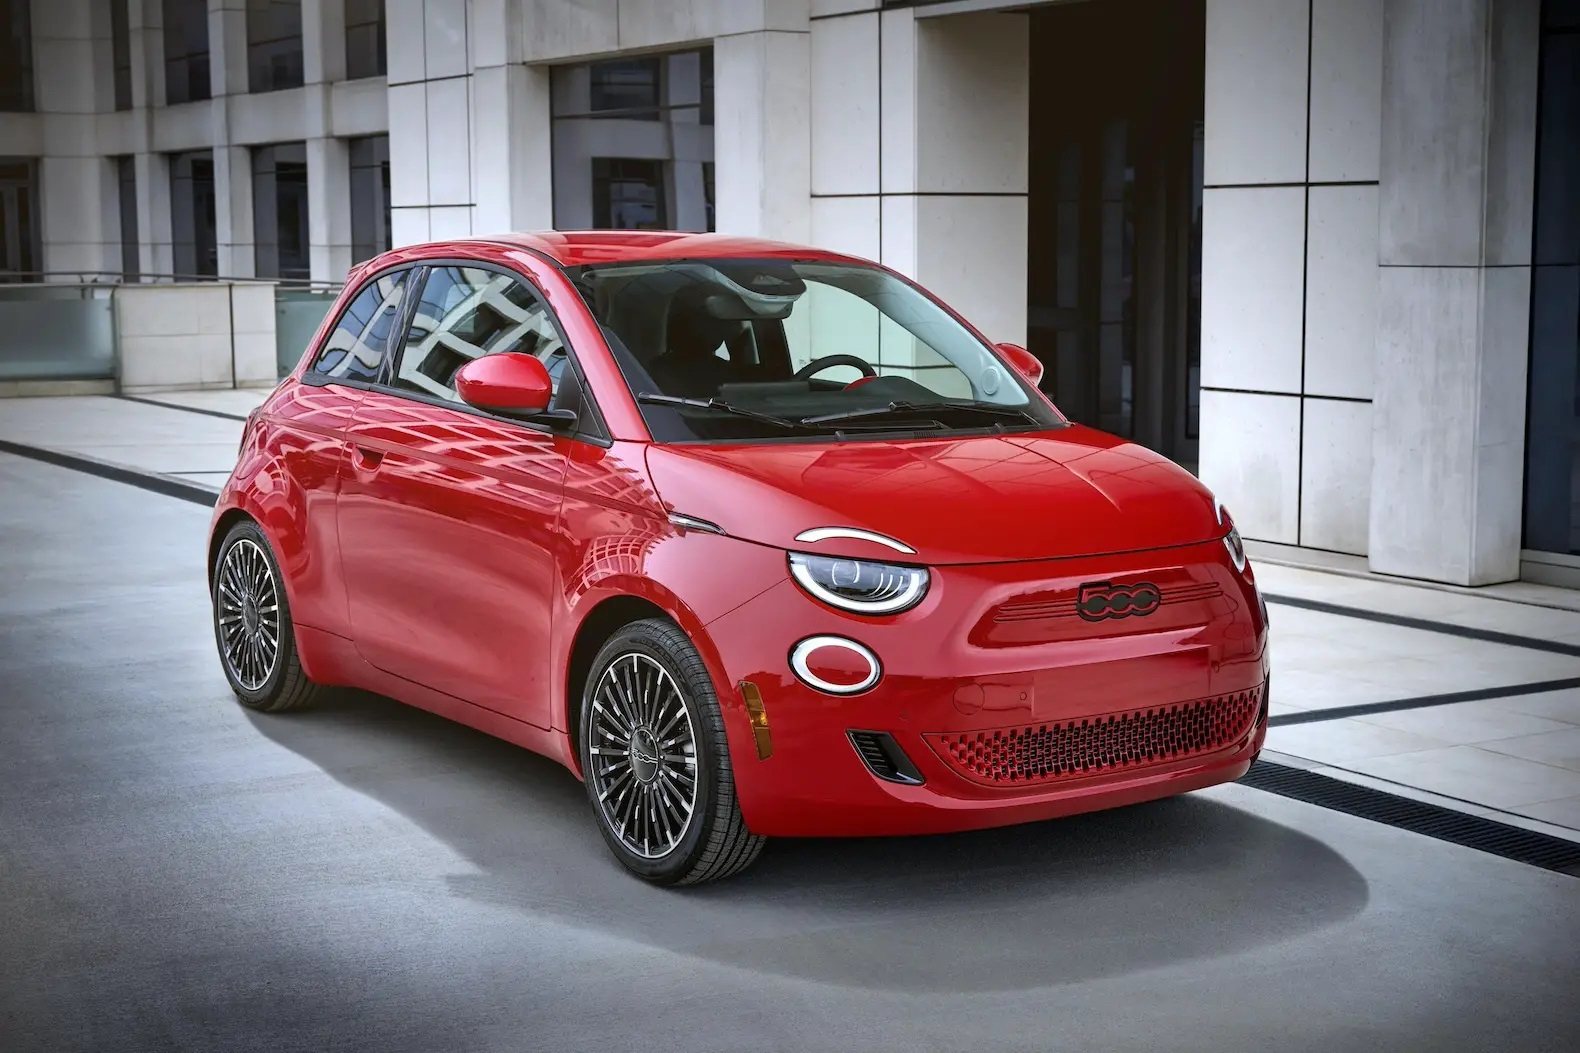 New EV: Fiat 500e Takes A Different Approach Compared To The Cybertruck